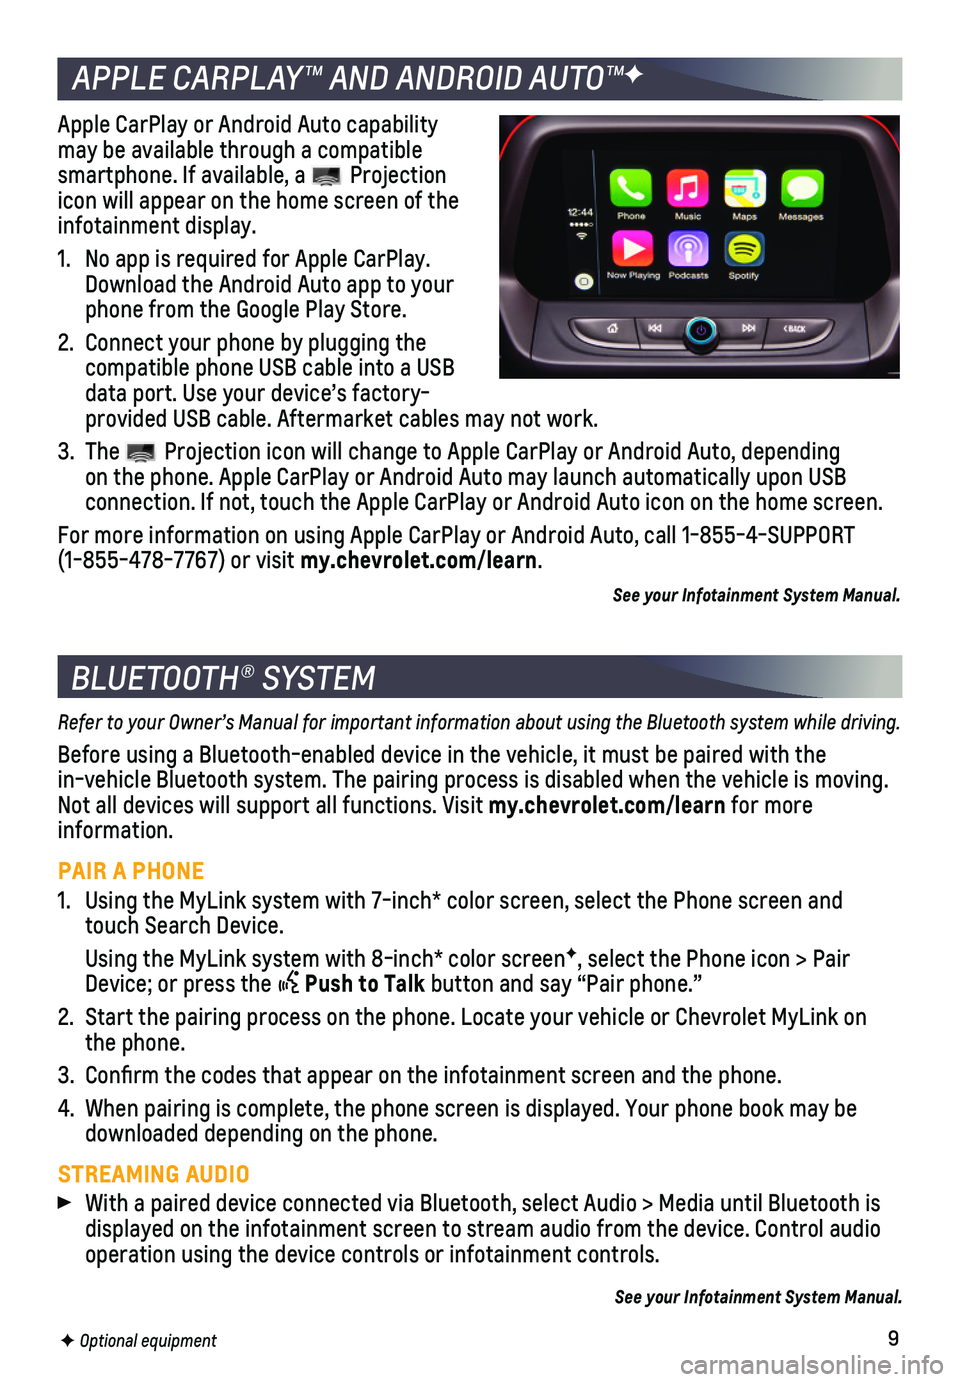 CHEVROLET CAMARO 2018  Get To Know Guide 9
BLUETOOTH® SYSTEM
Refer to your Owner’s Manual for important information about using the Bluetooth system while driving.
Before using a Bluetooth-enabled device in the vehicle, it must be paire\
